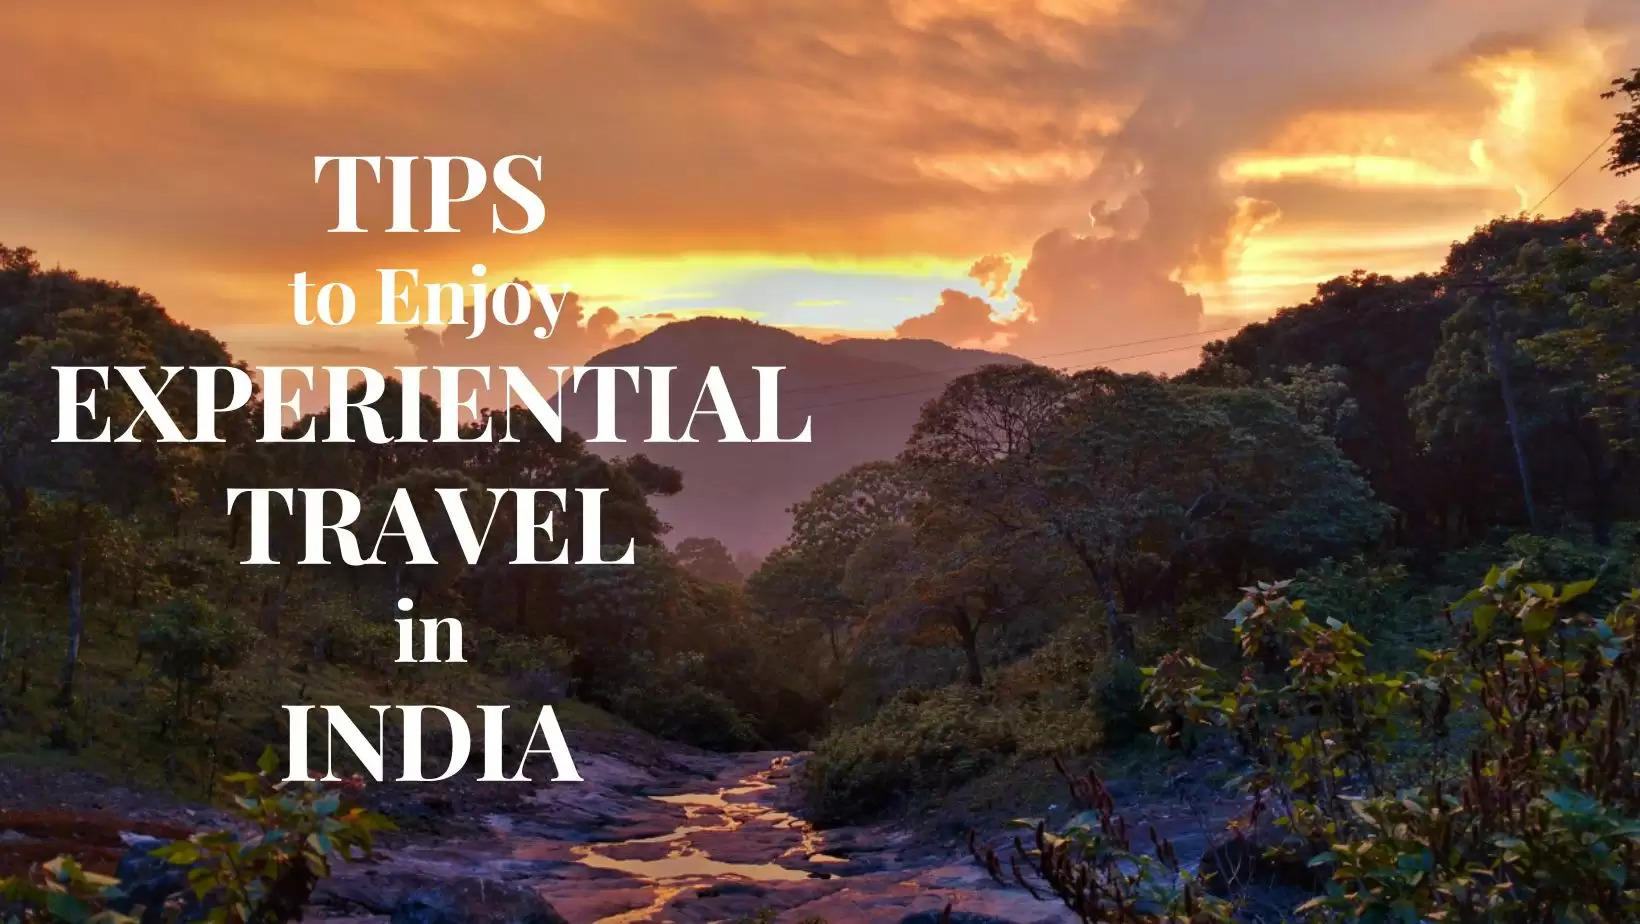 Tips to Enjoy Experiential Travel in India